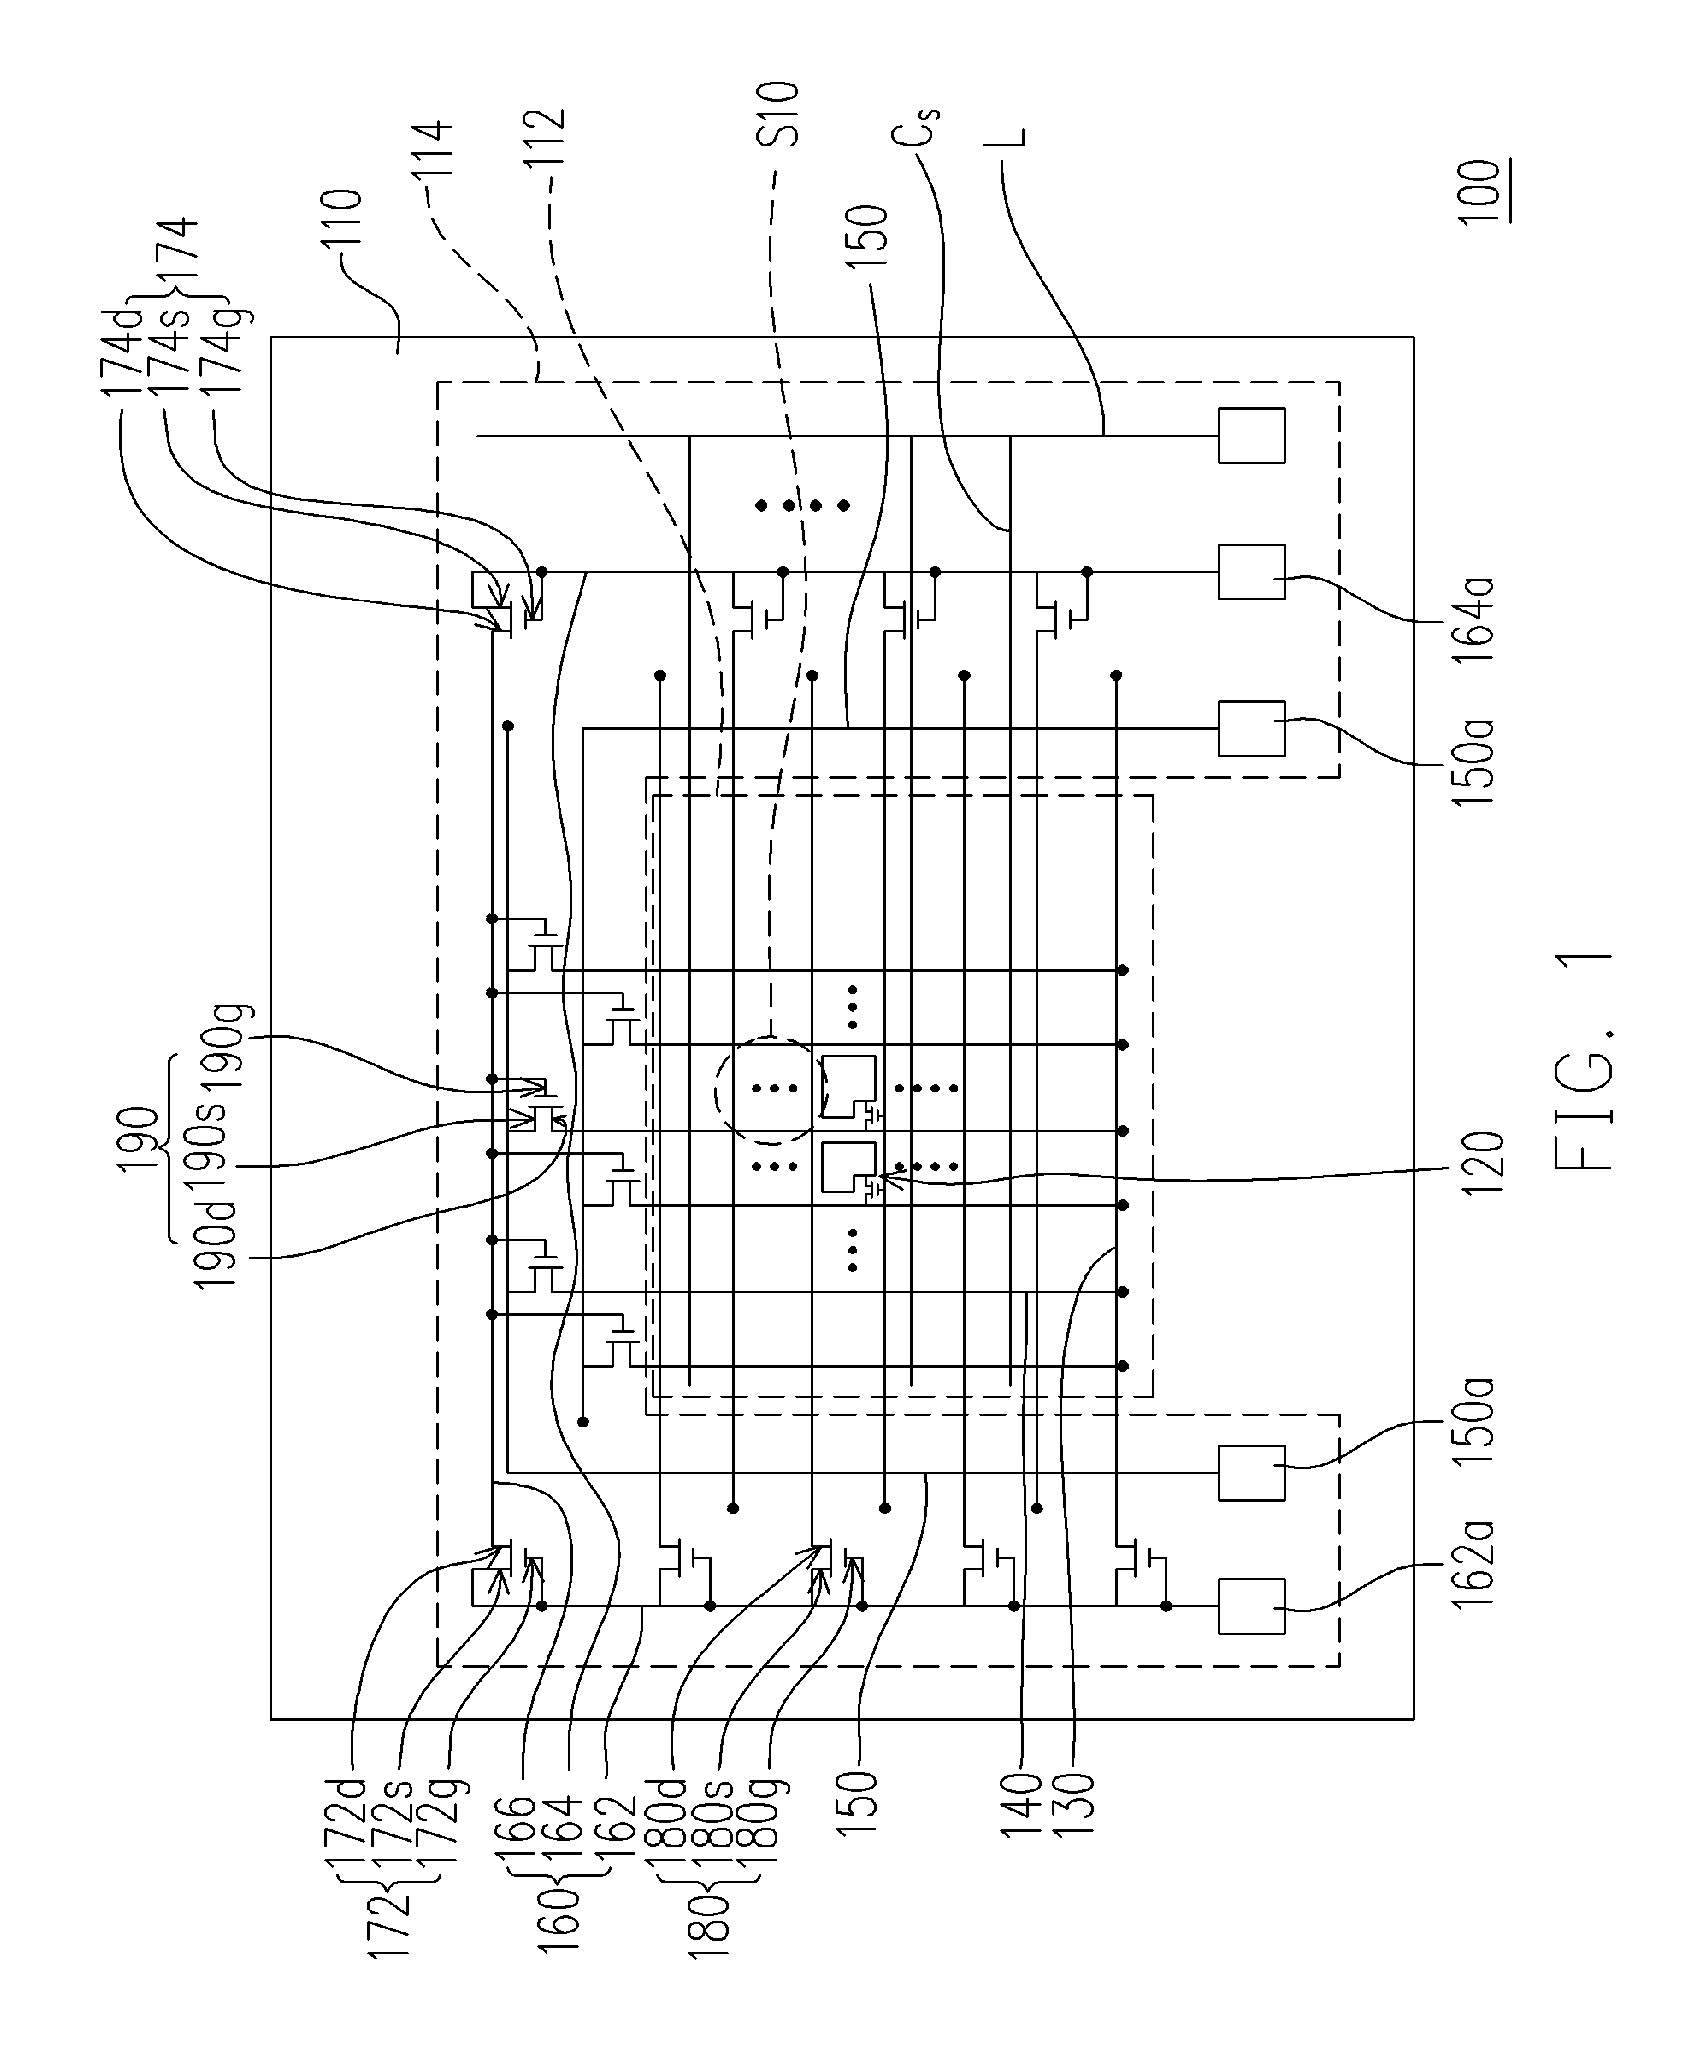 Active device array substrate, liquid crystal display panel and examining methods thereof